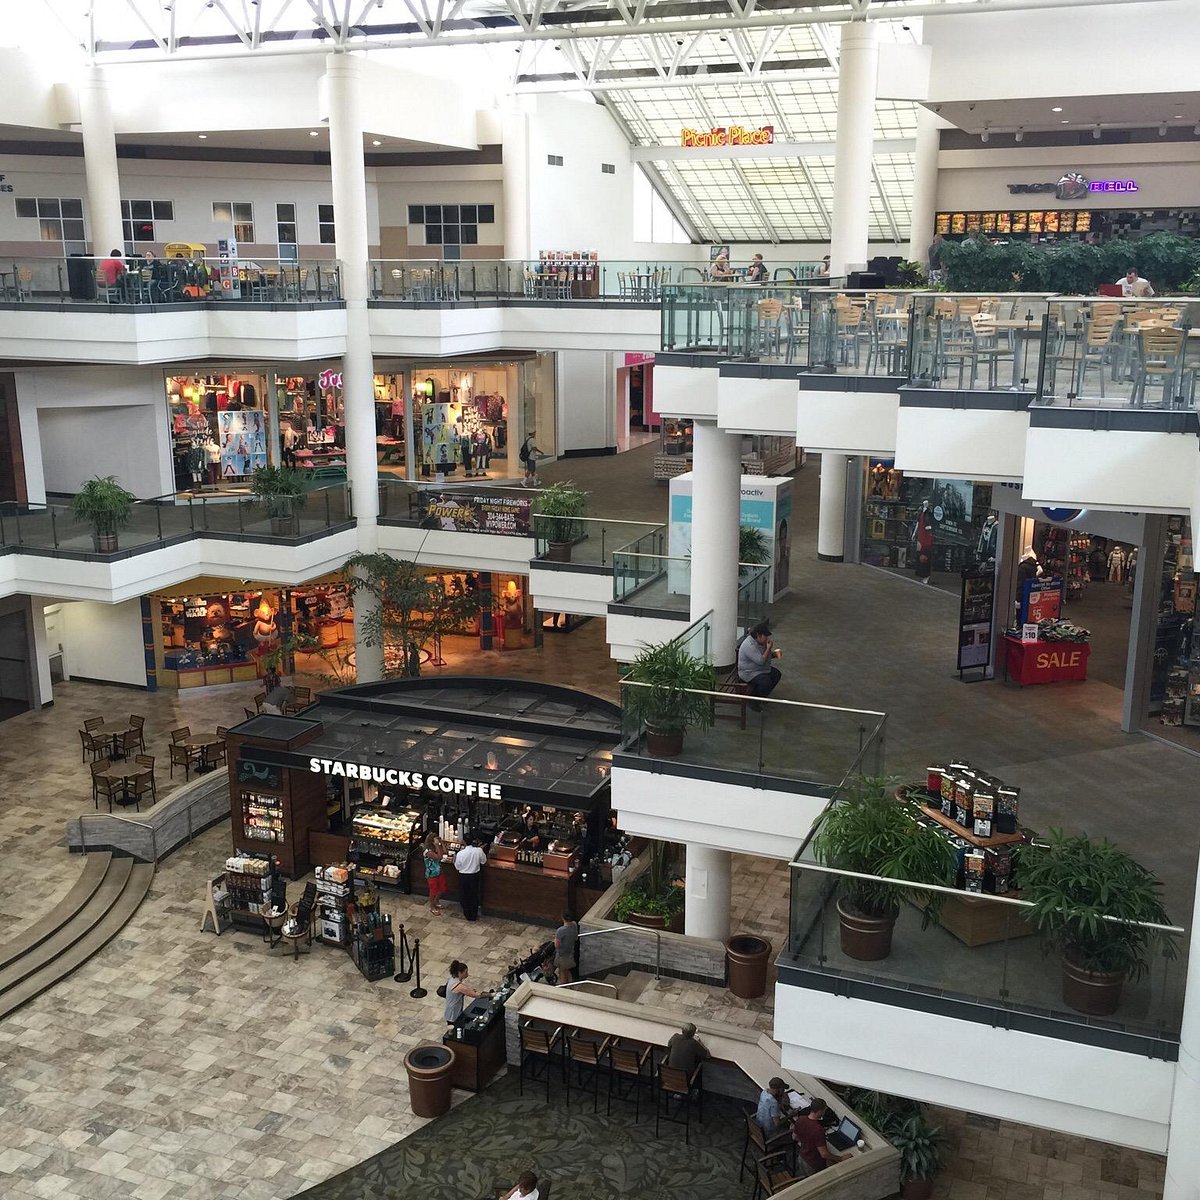 Mall At Short Hills, Other Shopping Centers On 'High Alert' After